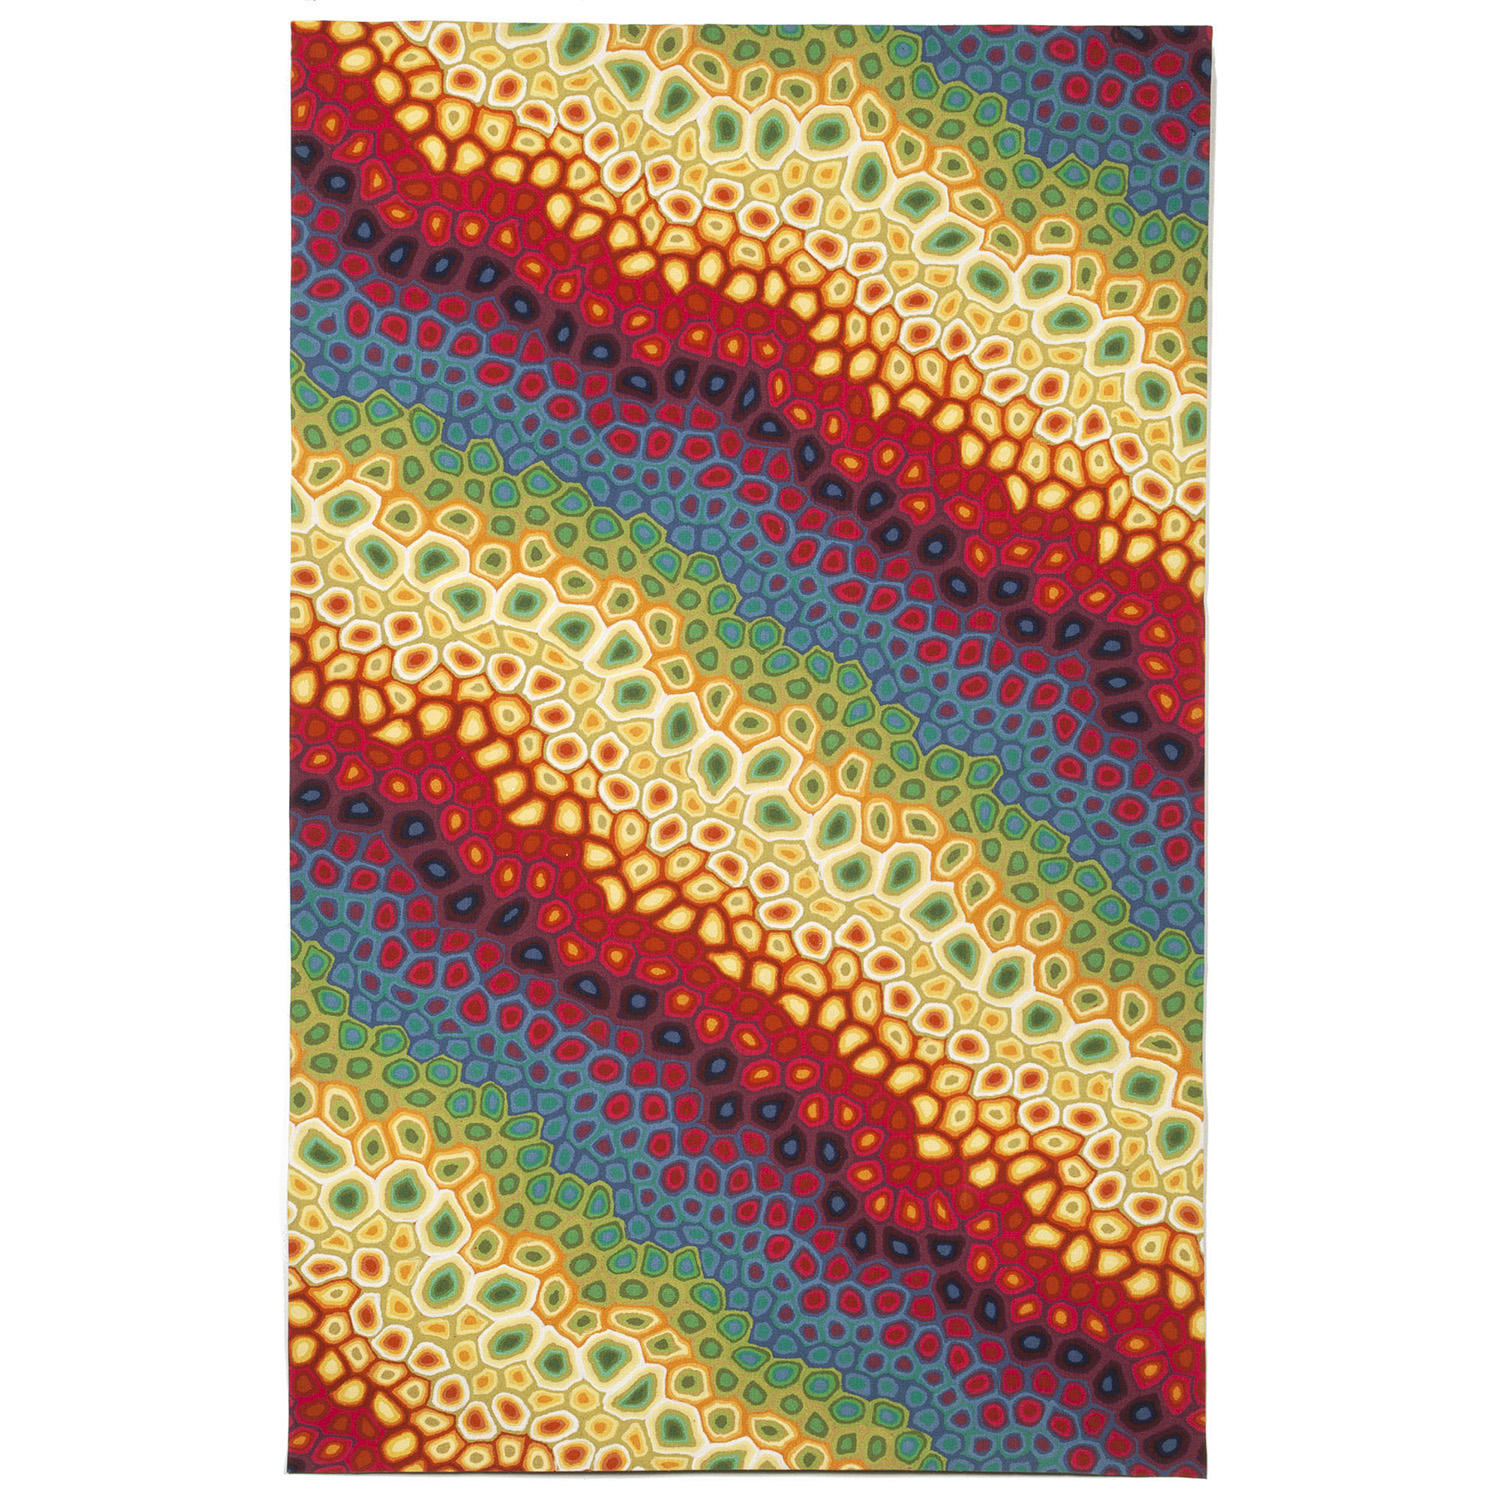 Liora Manne Visions IV  Rug-Abstract, Pop Swirl Multi  Product Image